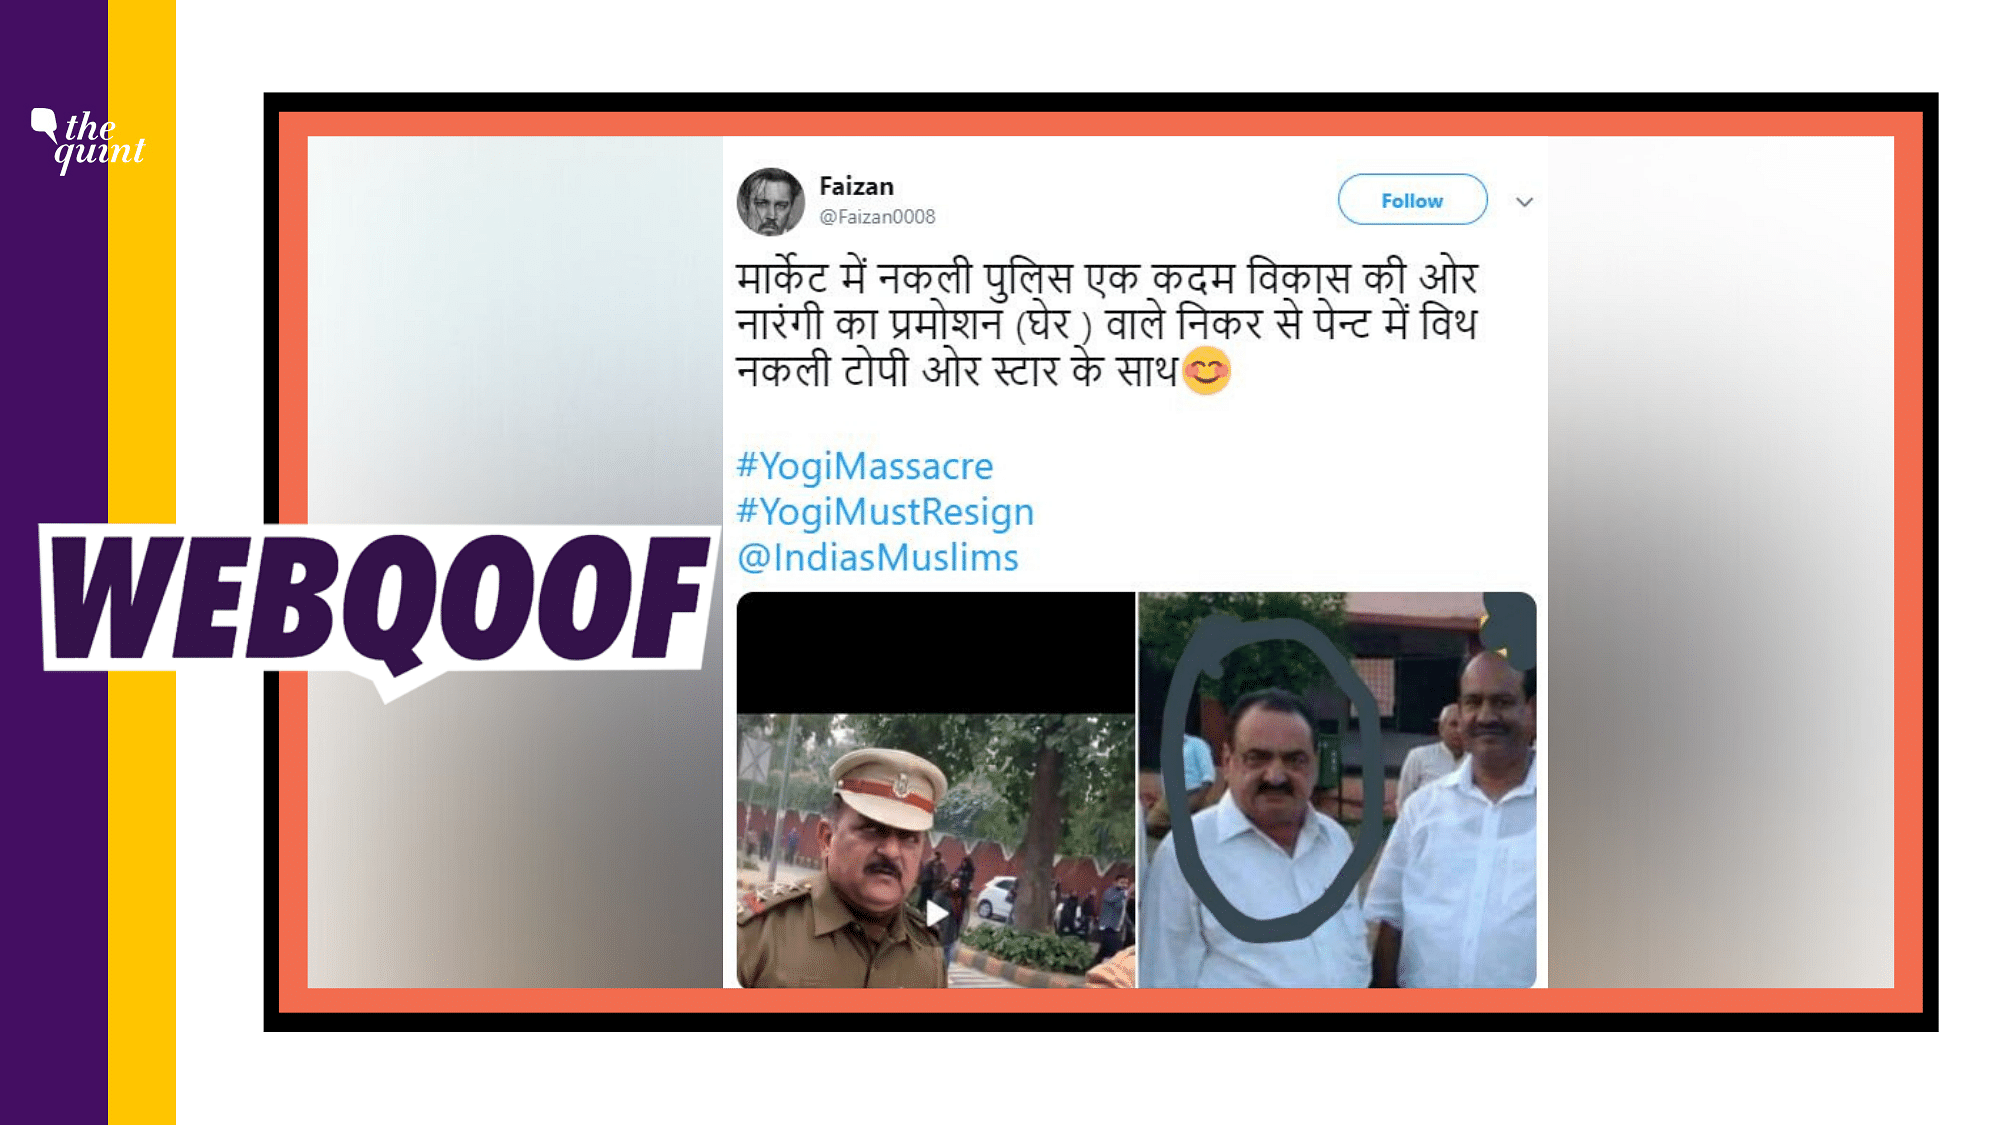 An image is being shared on social media with the claim that an RSS member impersonated a cop during protests against Citizenship (Amendment) Act.&nbsp;